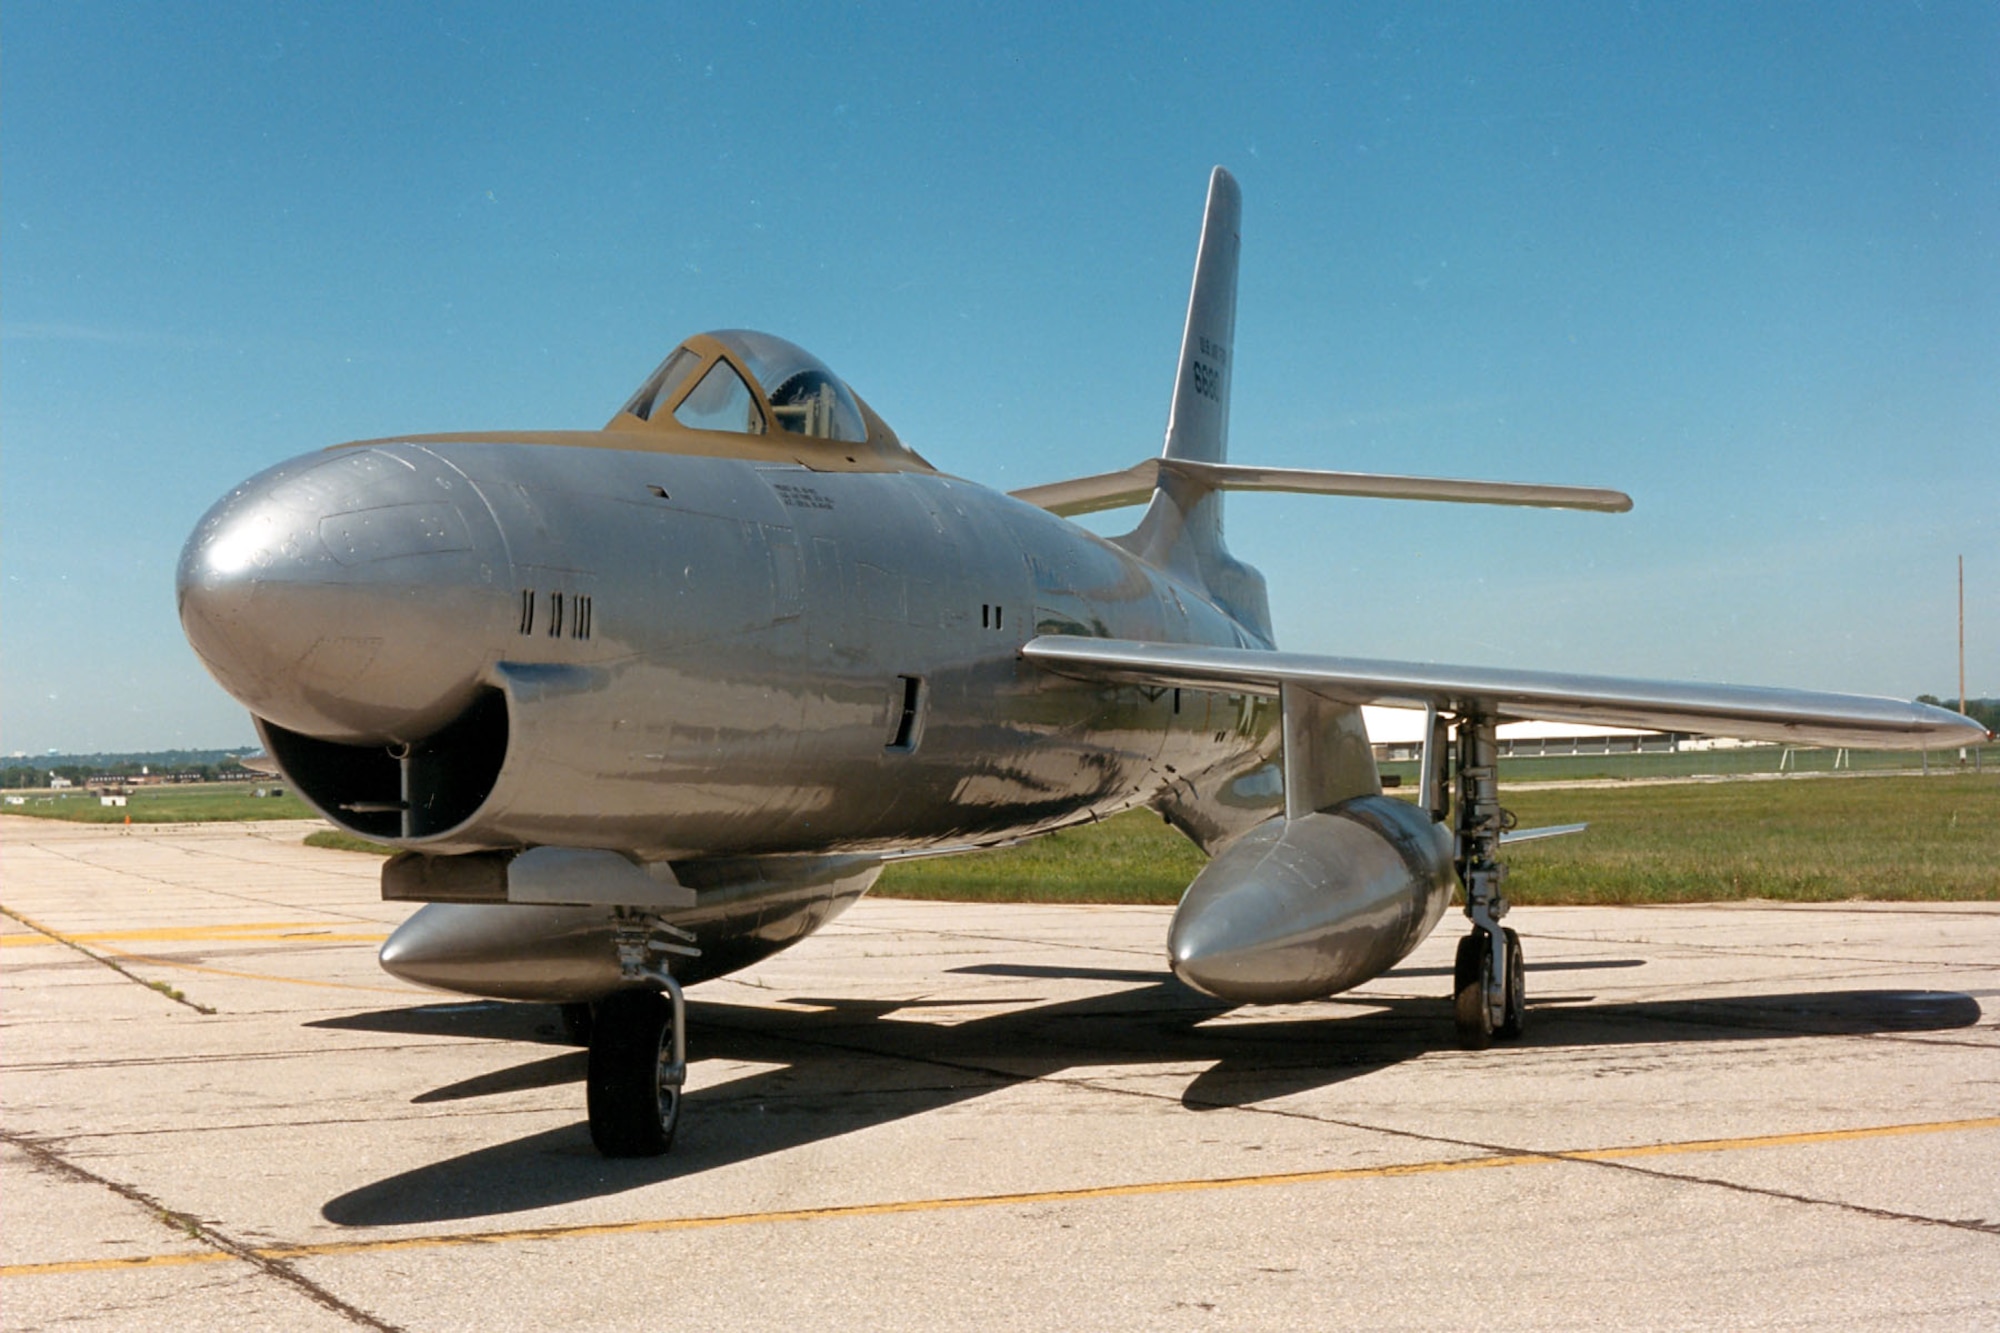 DAYTON, Ohio -- Republic XF-91 at the National Museum of the United States Air Force. (U.S. Air Force photo)